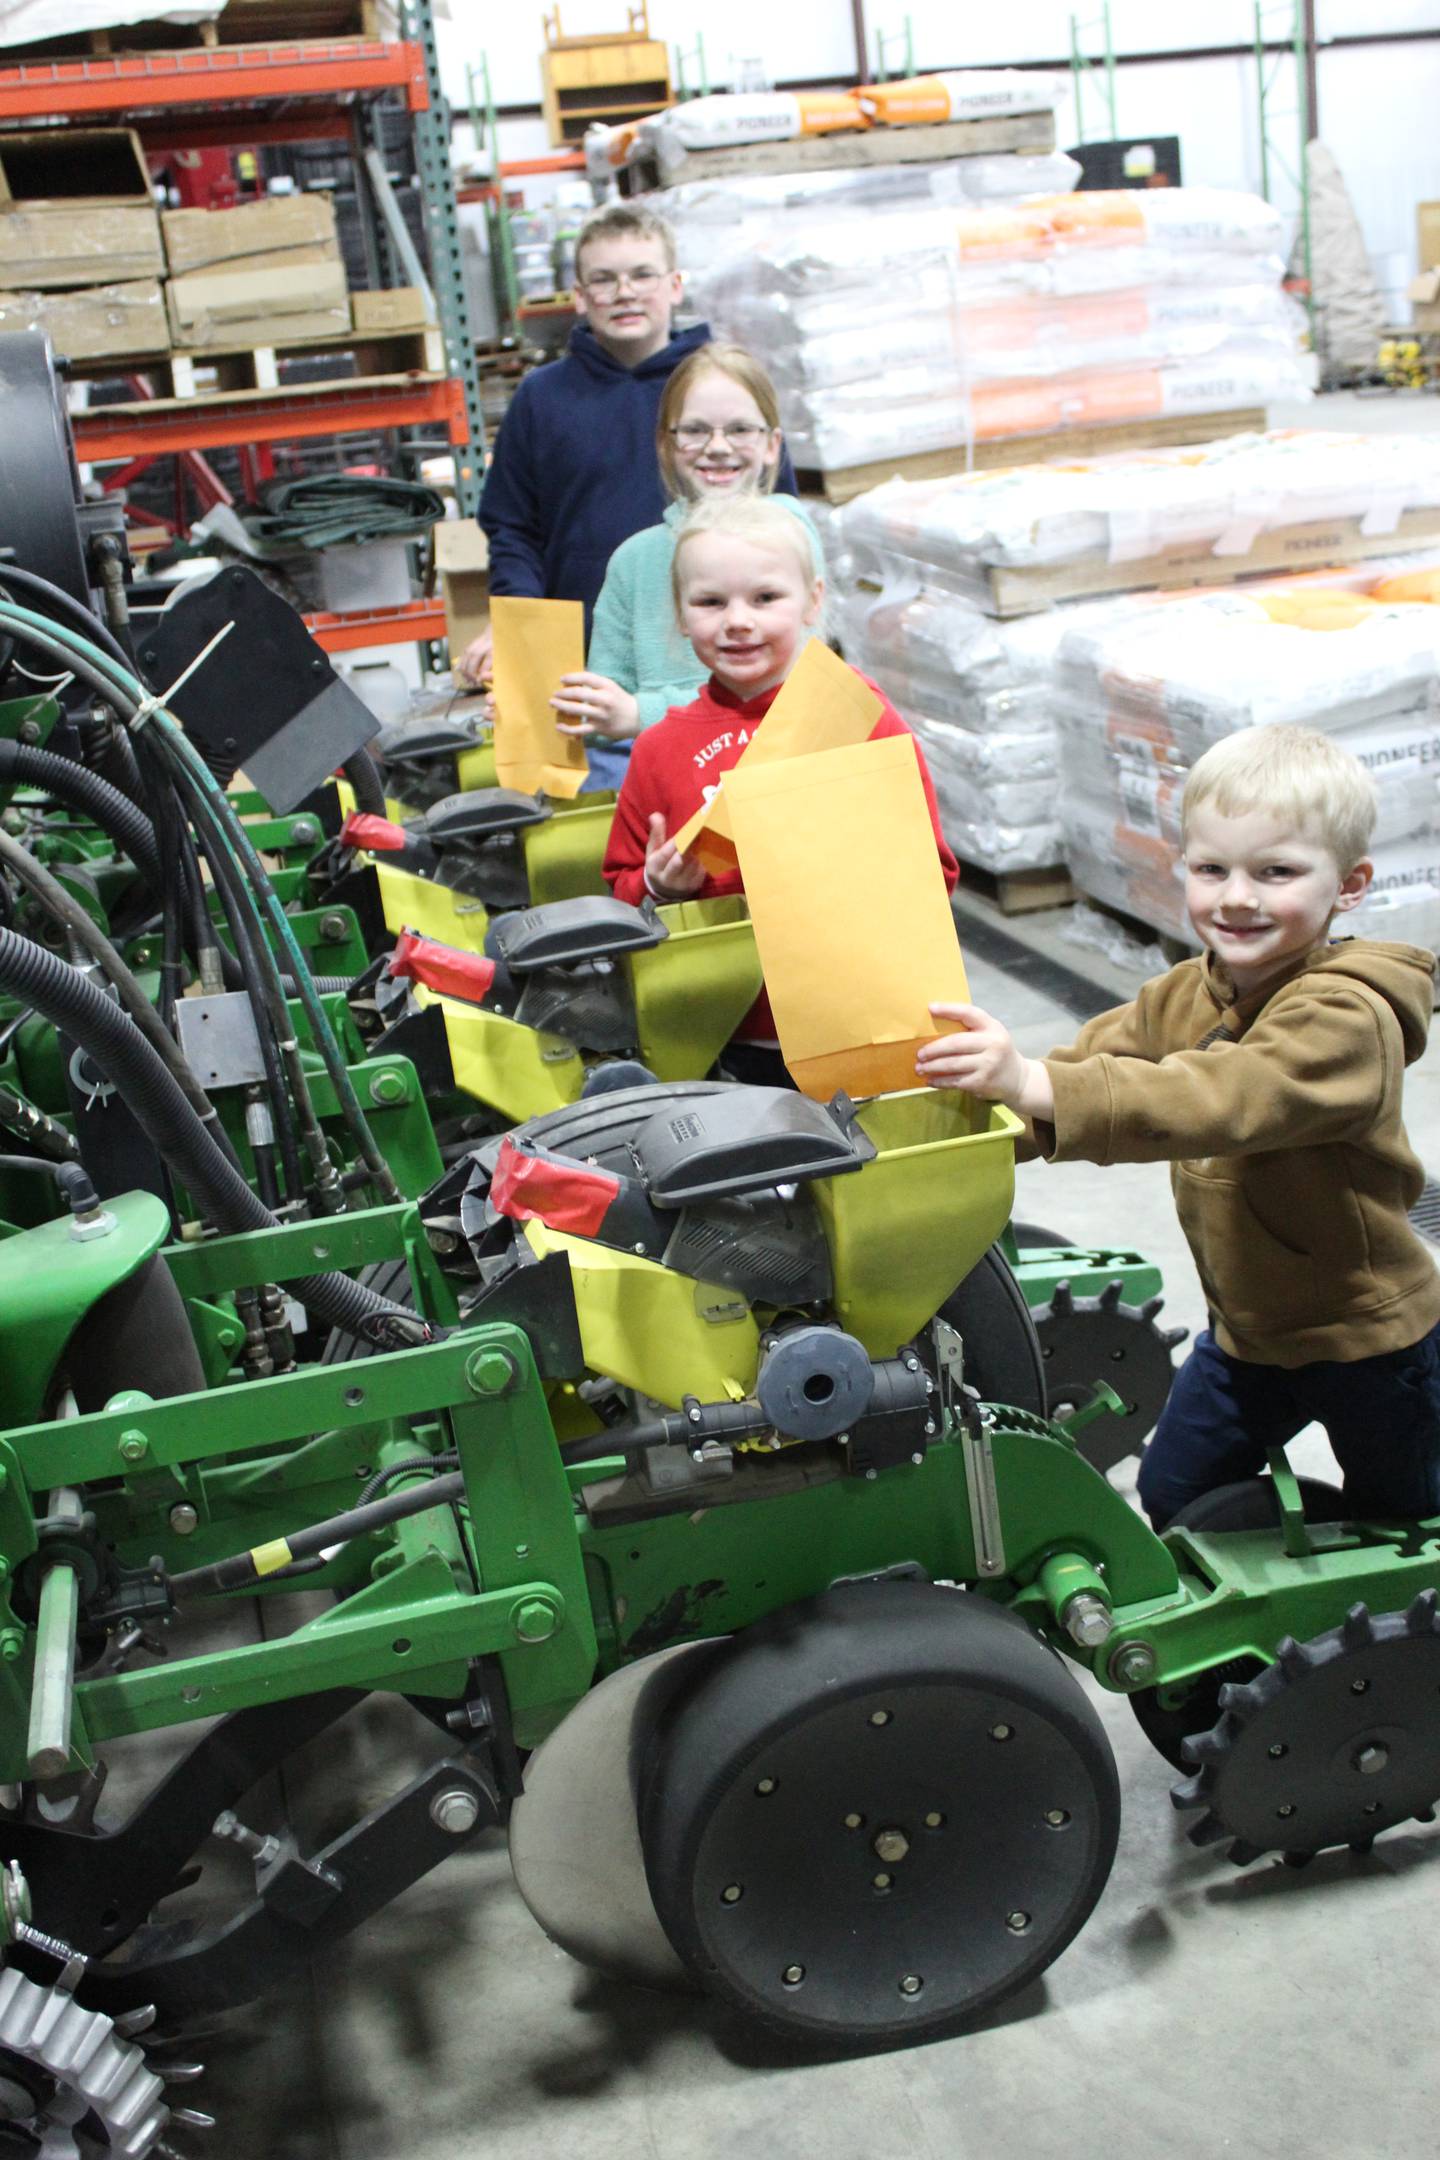 Correy and Kellie Rahn’s kids Anthony (from front to back), Adalynn, Emilie and Austin demonstrate how they add seed to the boxes of the four-row test plot planter. The kids help fill these envelopes in the seed shed in advance to help speed up the planting process in the field.